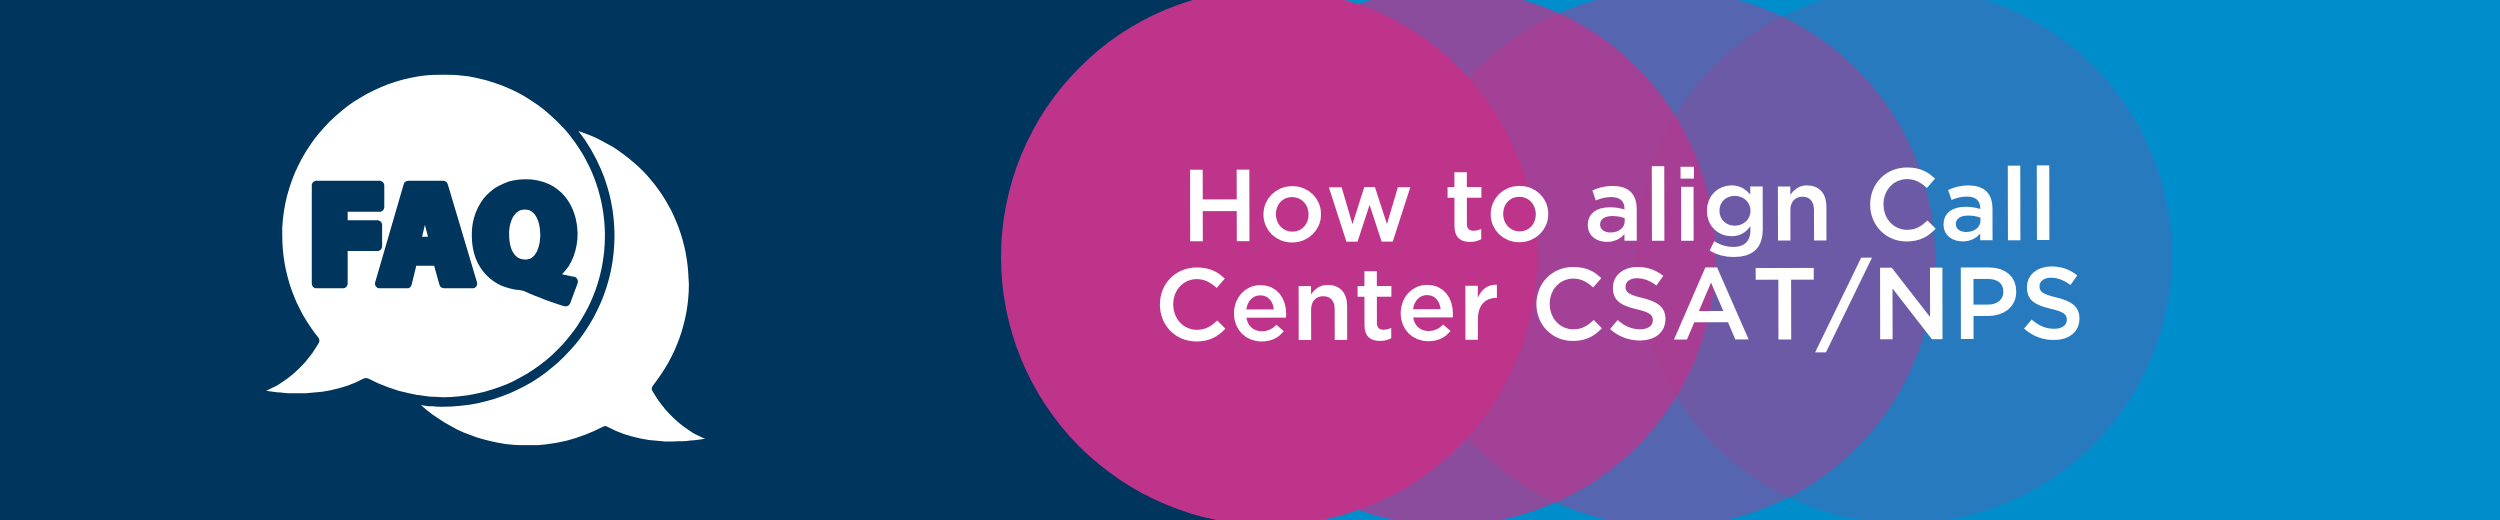 How to align Call Center CSAT/NPS